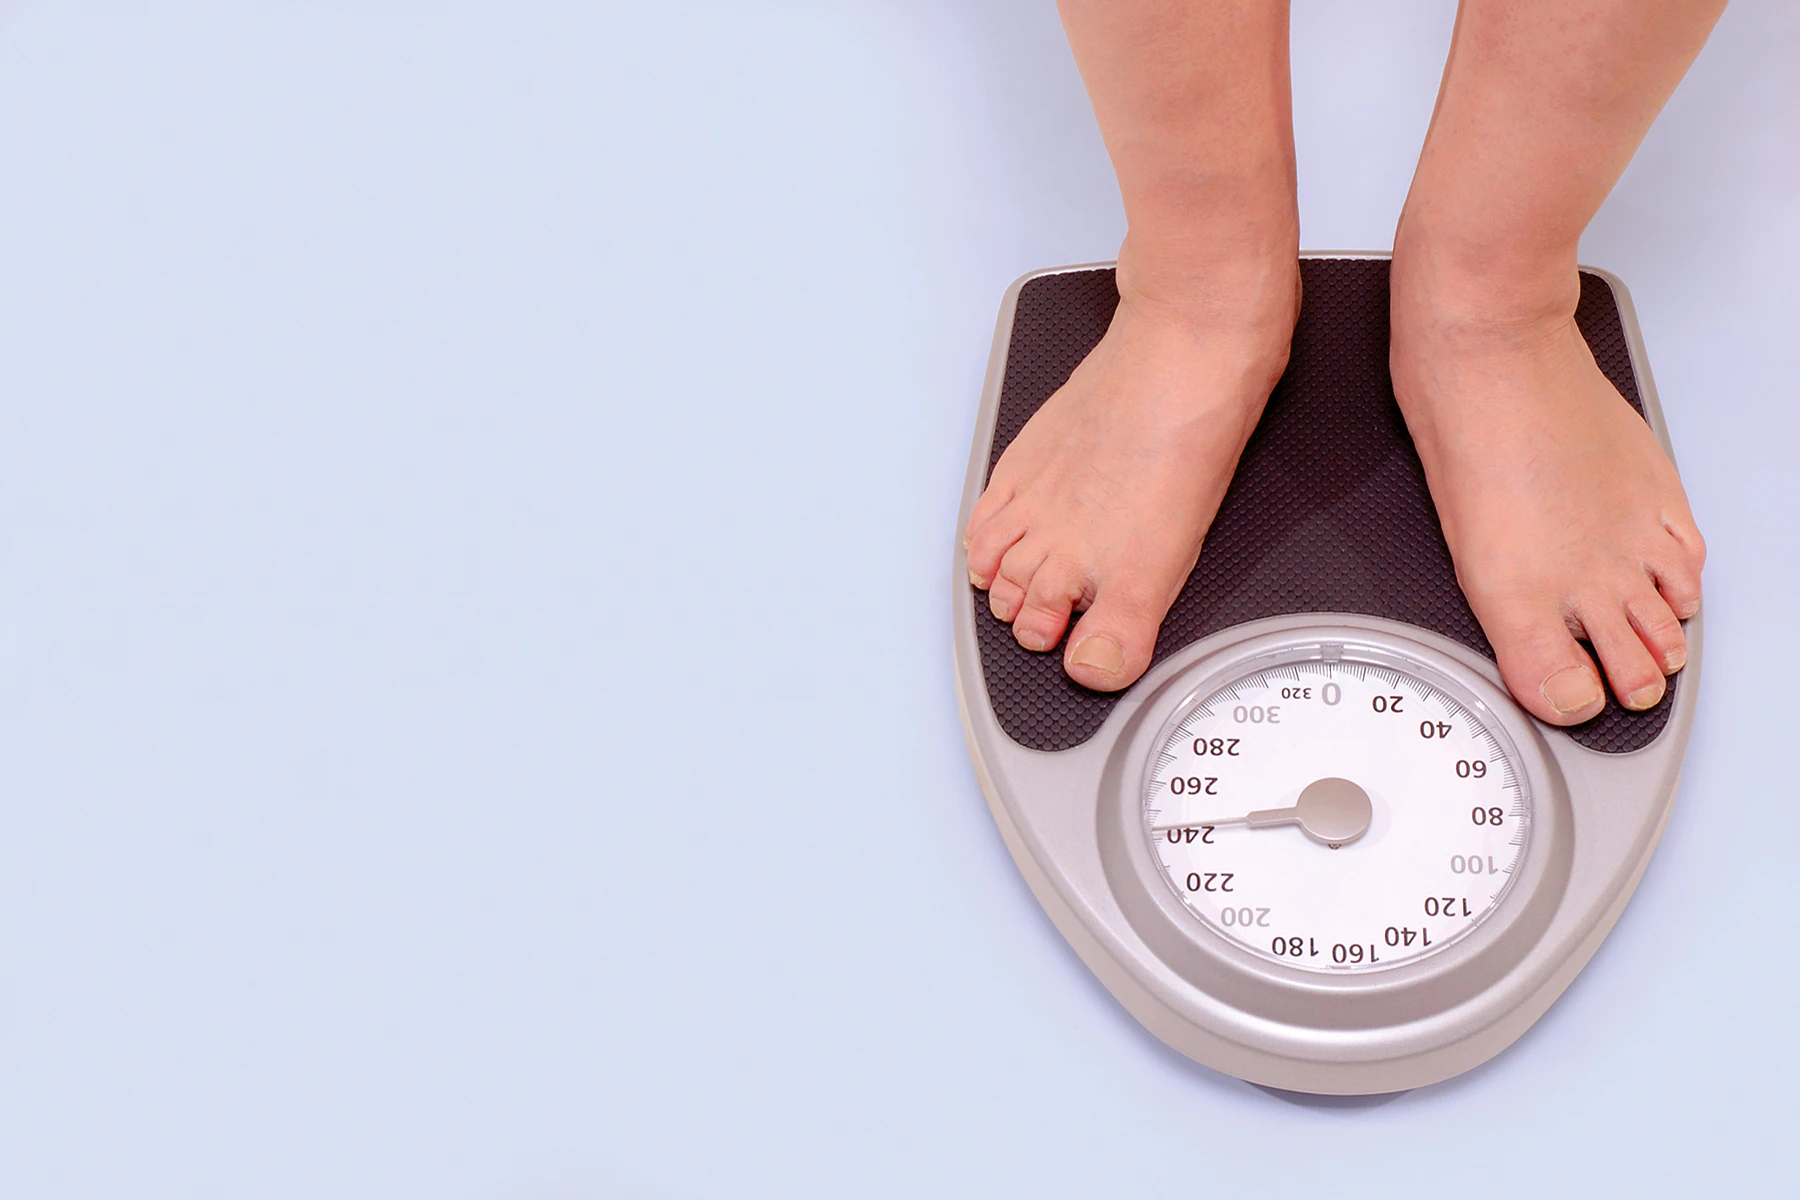 Can Overweight Doctors Actually Give Credible Weight Loss Advice?